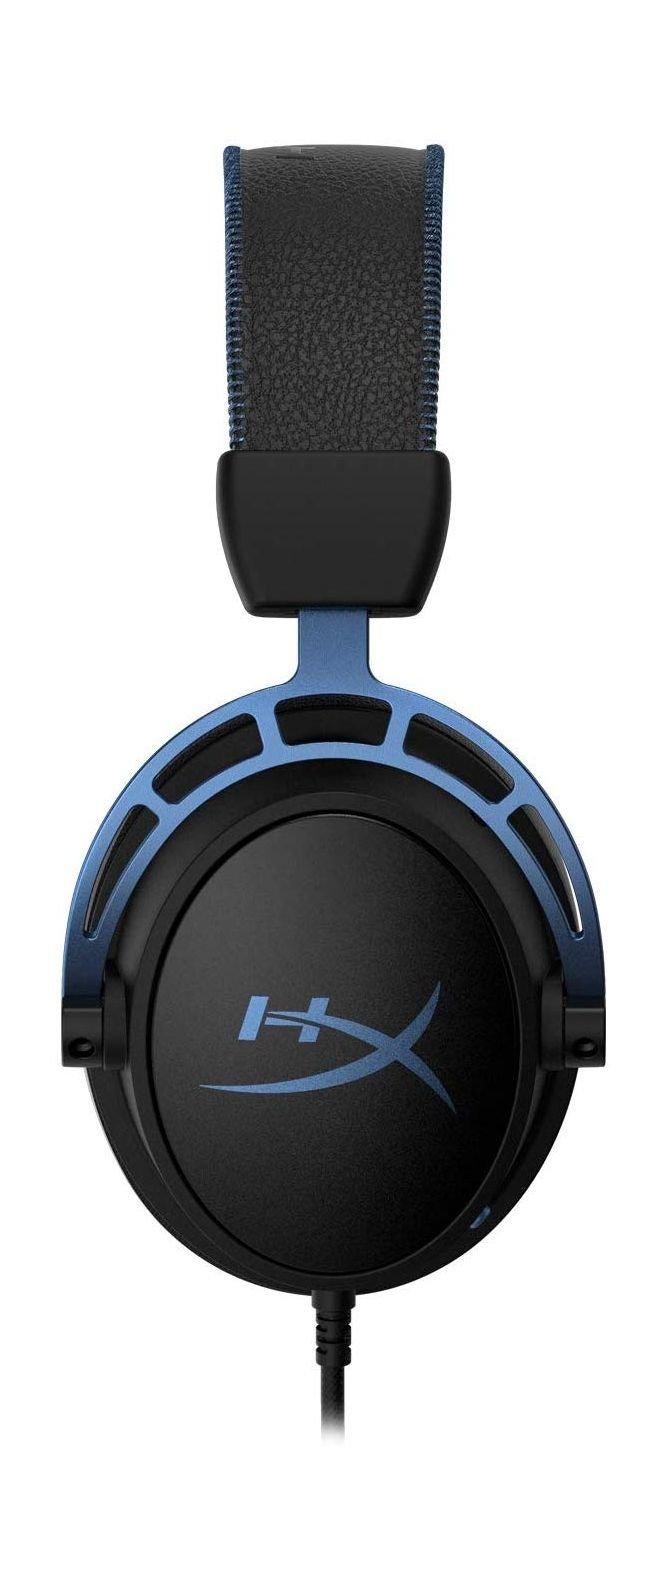 Wired Alpha Gaming In Hyperx Kuwait, OFF S 57% Price Headphone Cloud